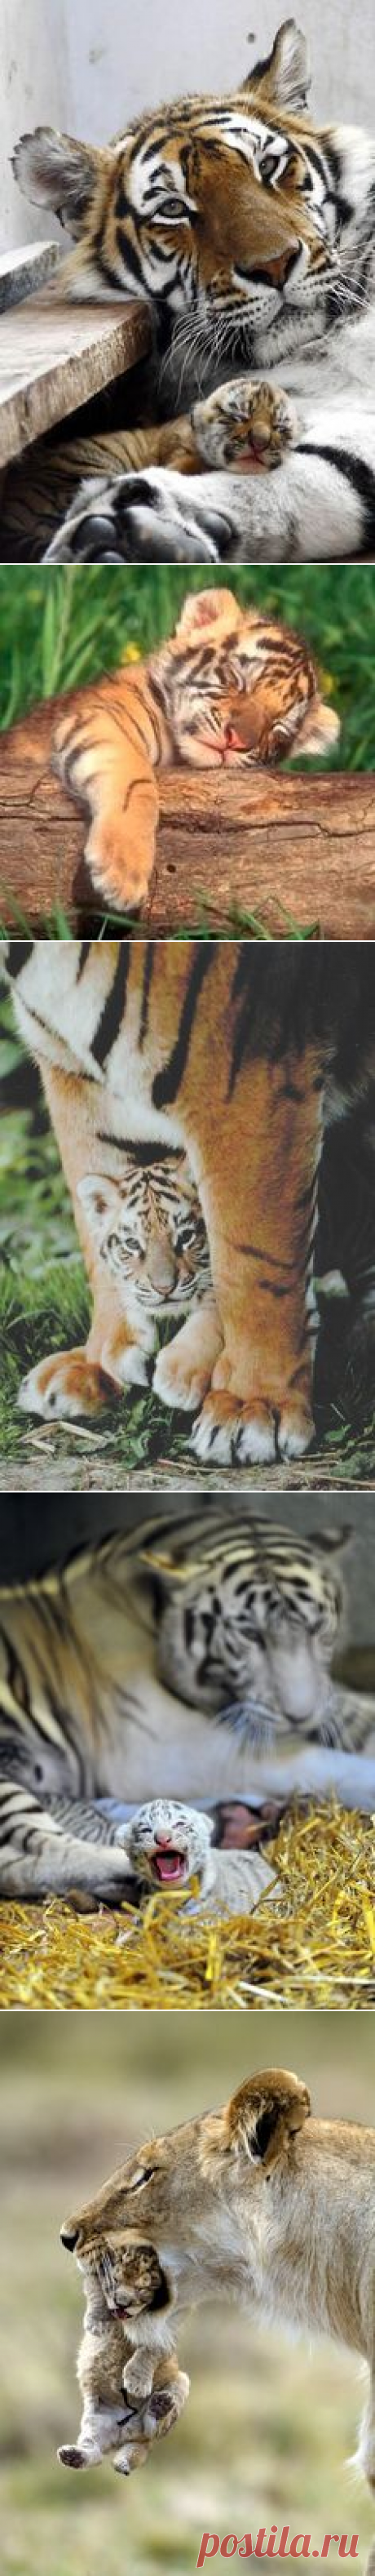 Thought this was a lovely photo of a big cat until I looked again - it is of two cats. S | Sweet animals | Большие Кошки, Тигрята и Детеныши